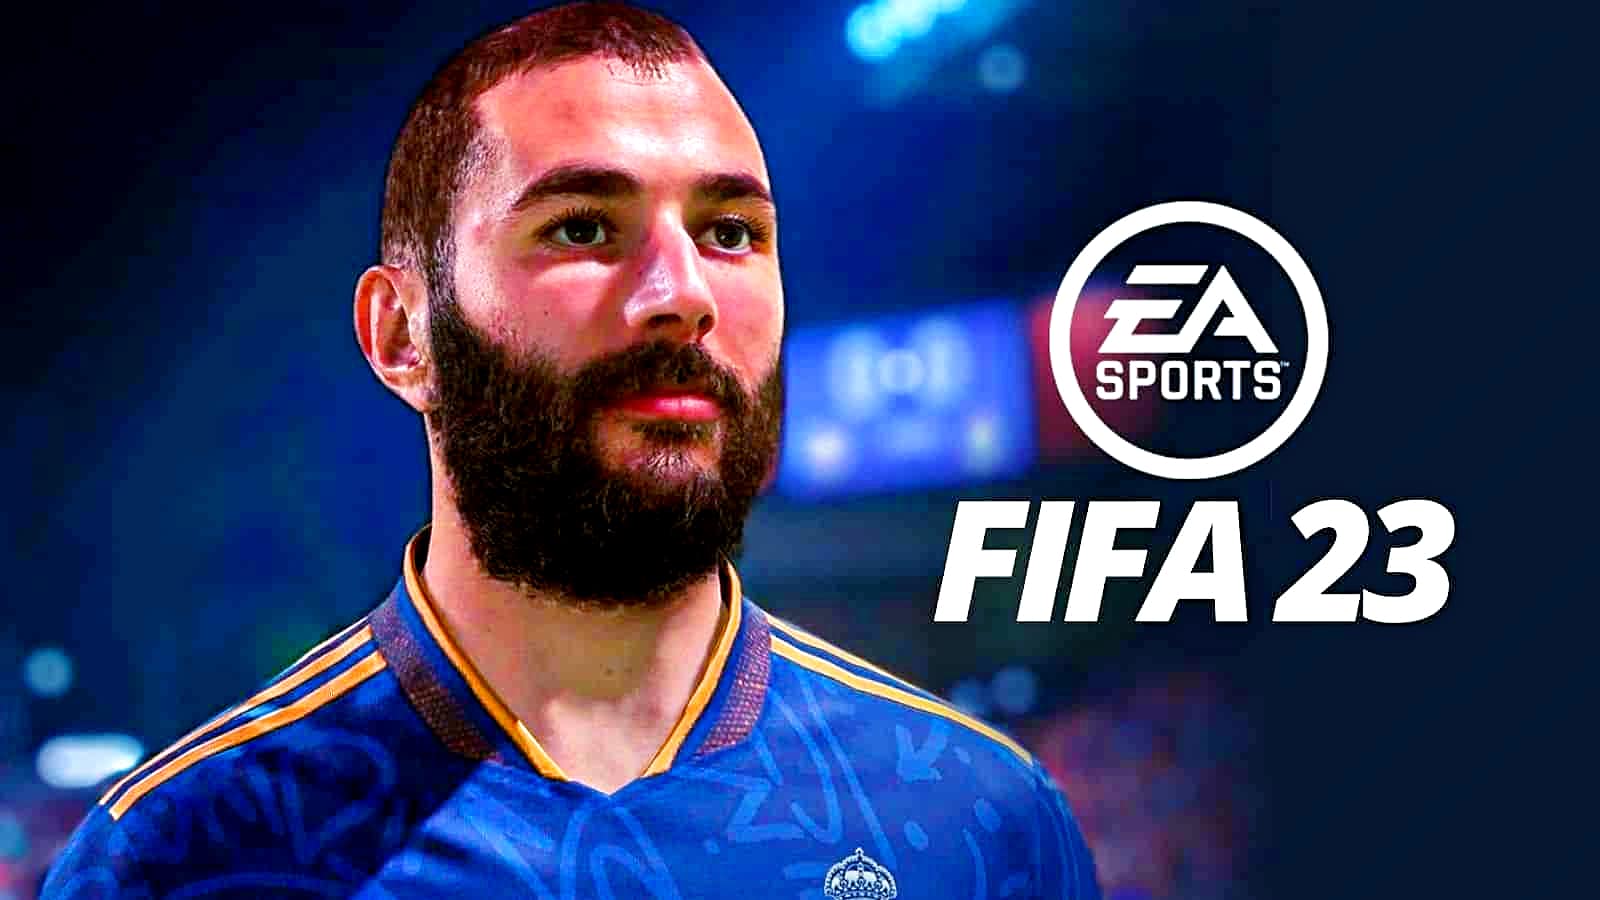 FIFA 23: Top 10 Passers - Averages and Rating